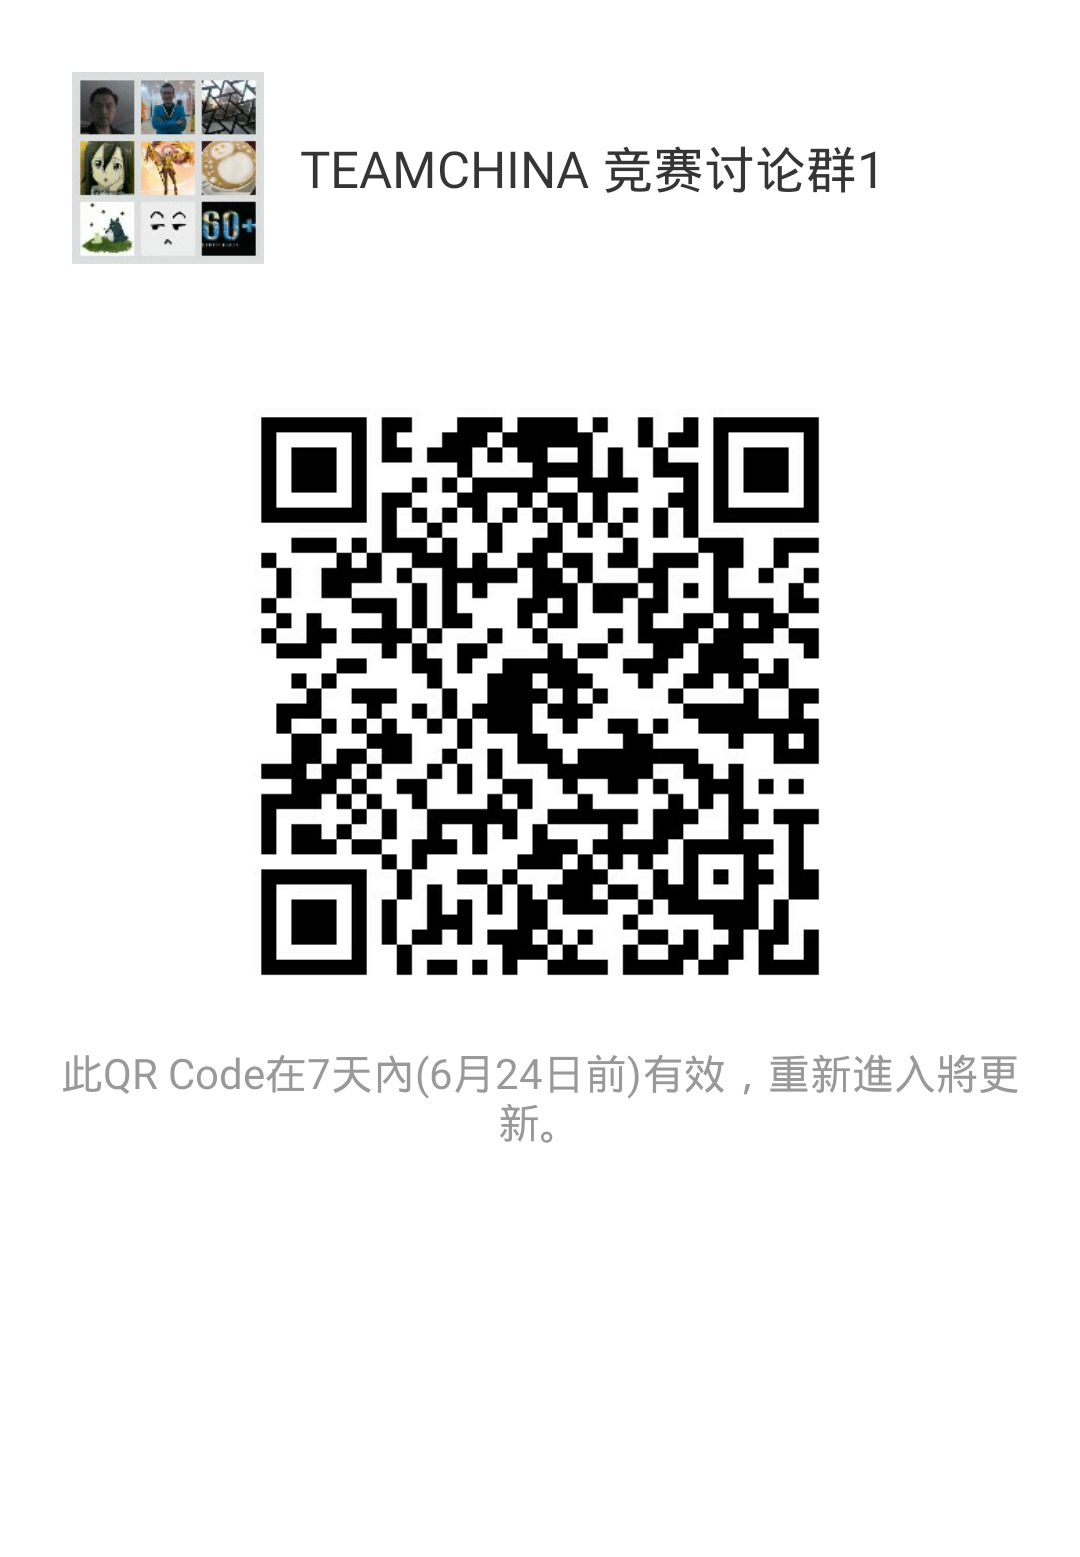 mmqrcode1466093422837.png